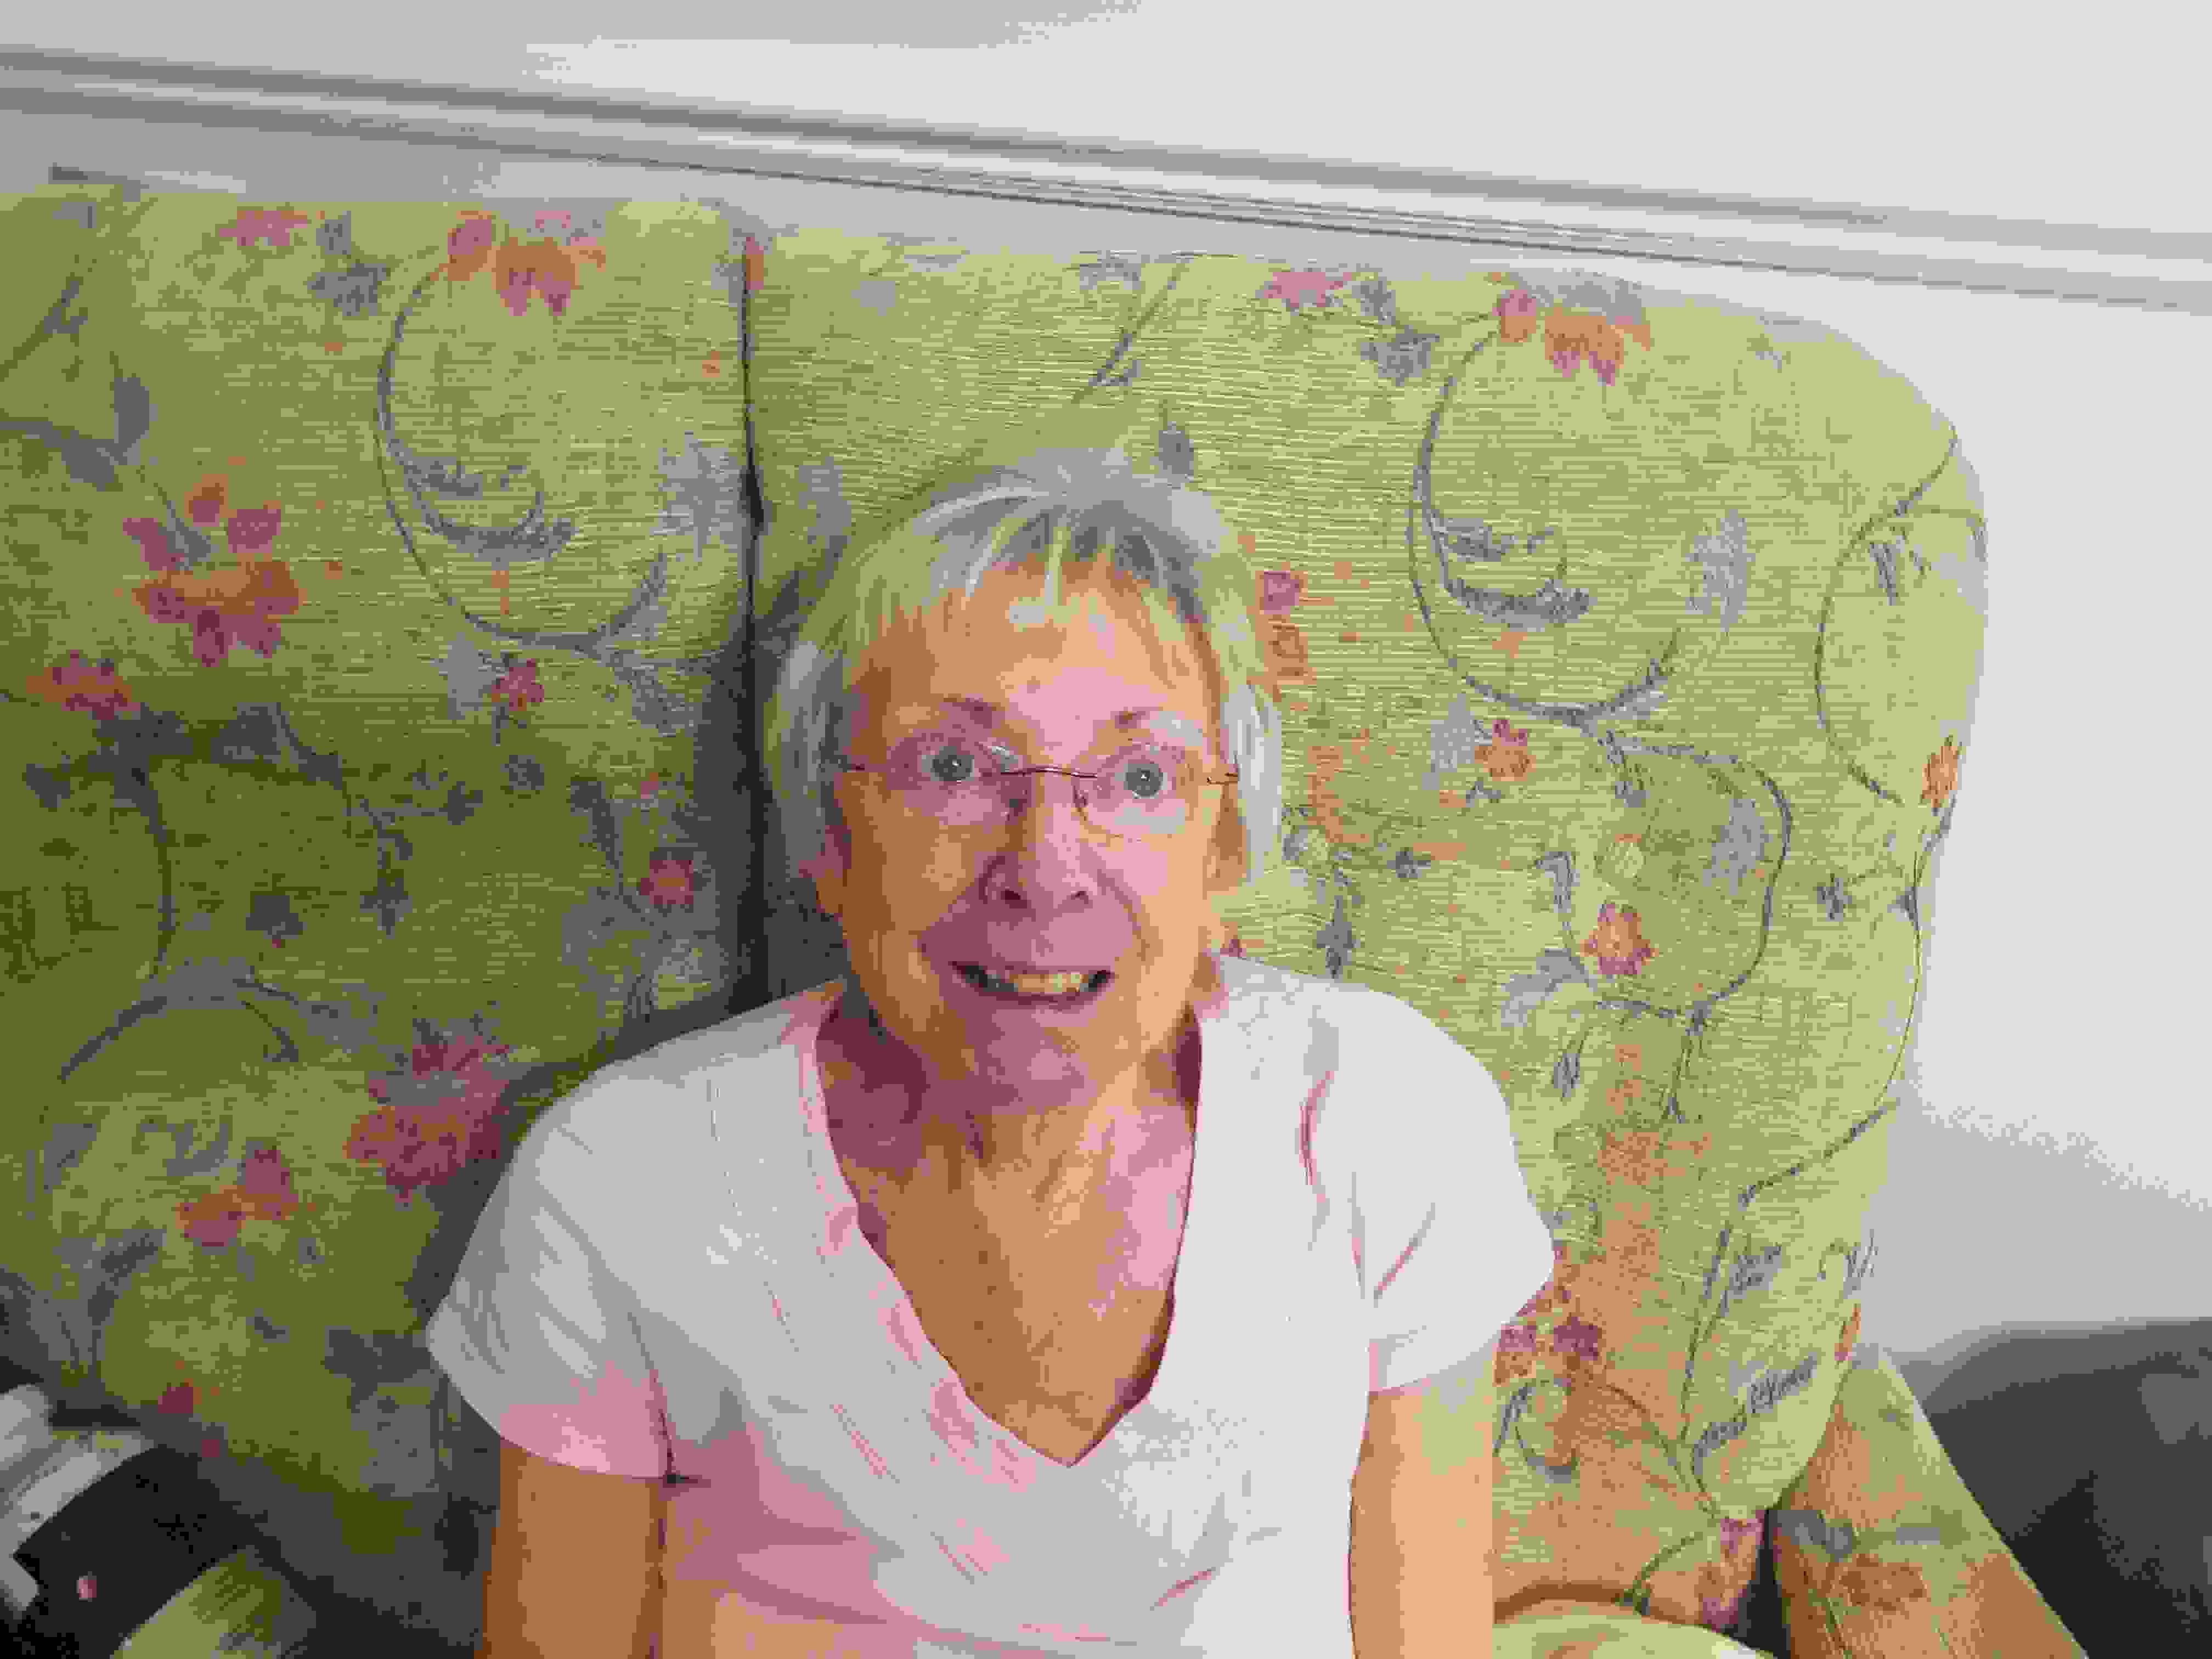 Mary Burrow - care home resident